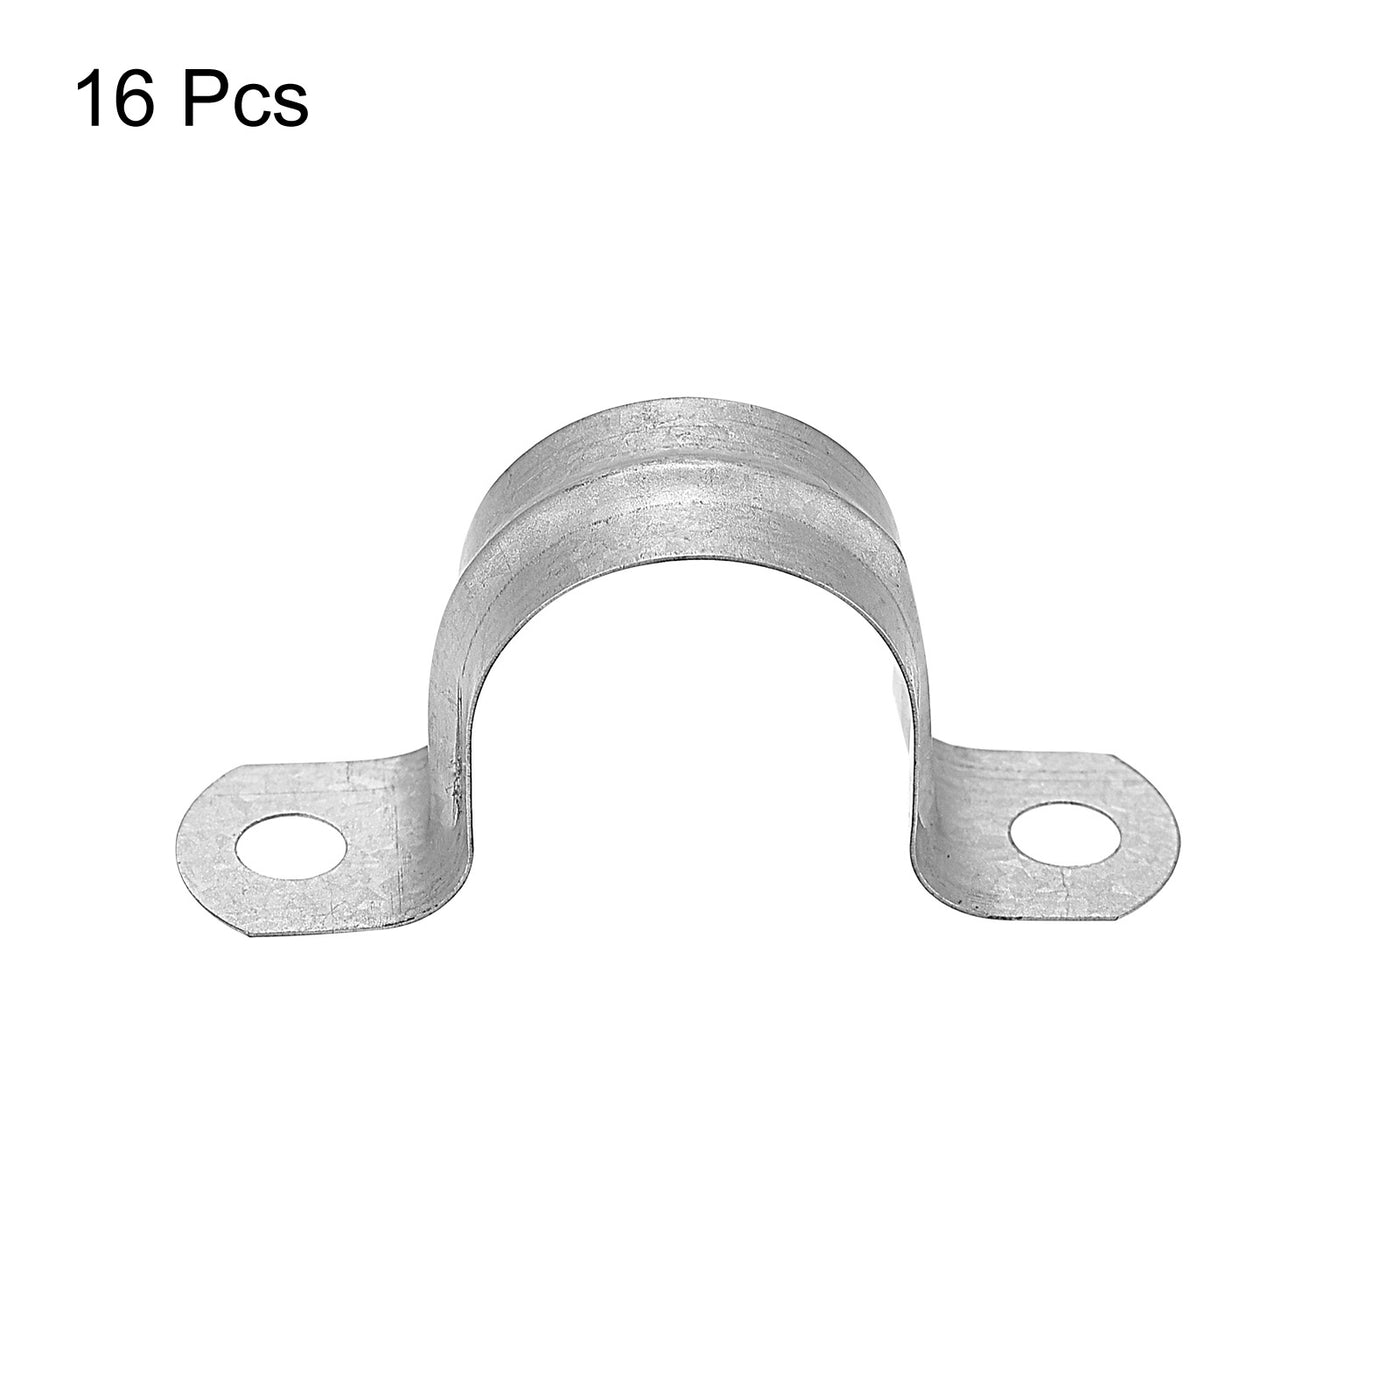 uxcell Uxcell Rigid Pipe Strap 16pcs 3/4" (20mm) Carbon Steel U Bracket Tension Tube Clamp